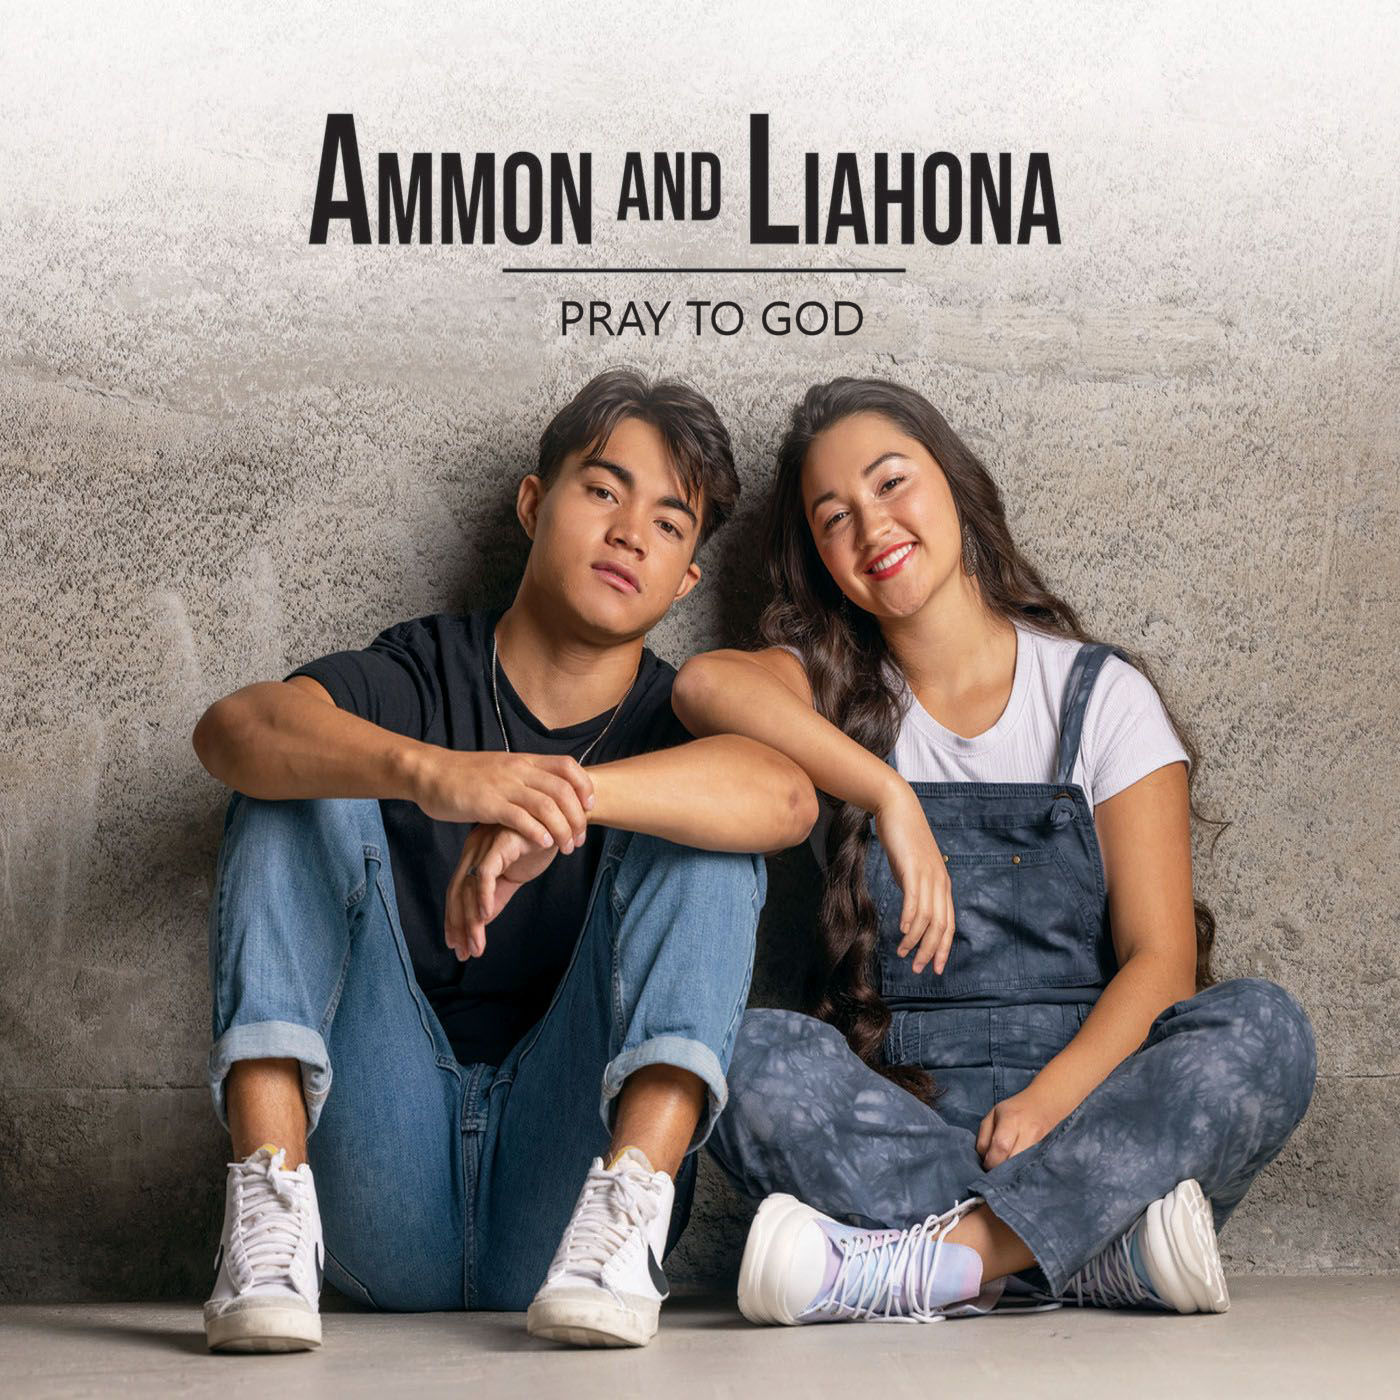 Podsafe music for your podcast. Play this podsafe music on your next episode - Ammon and Liahona Olayan – Pray to God | NY City Podcast Network